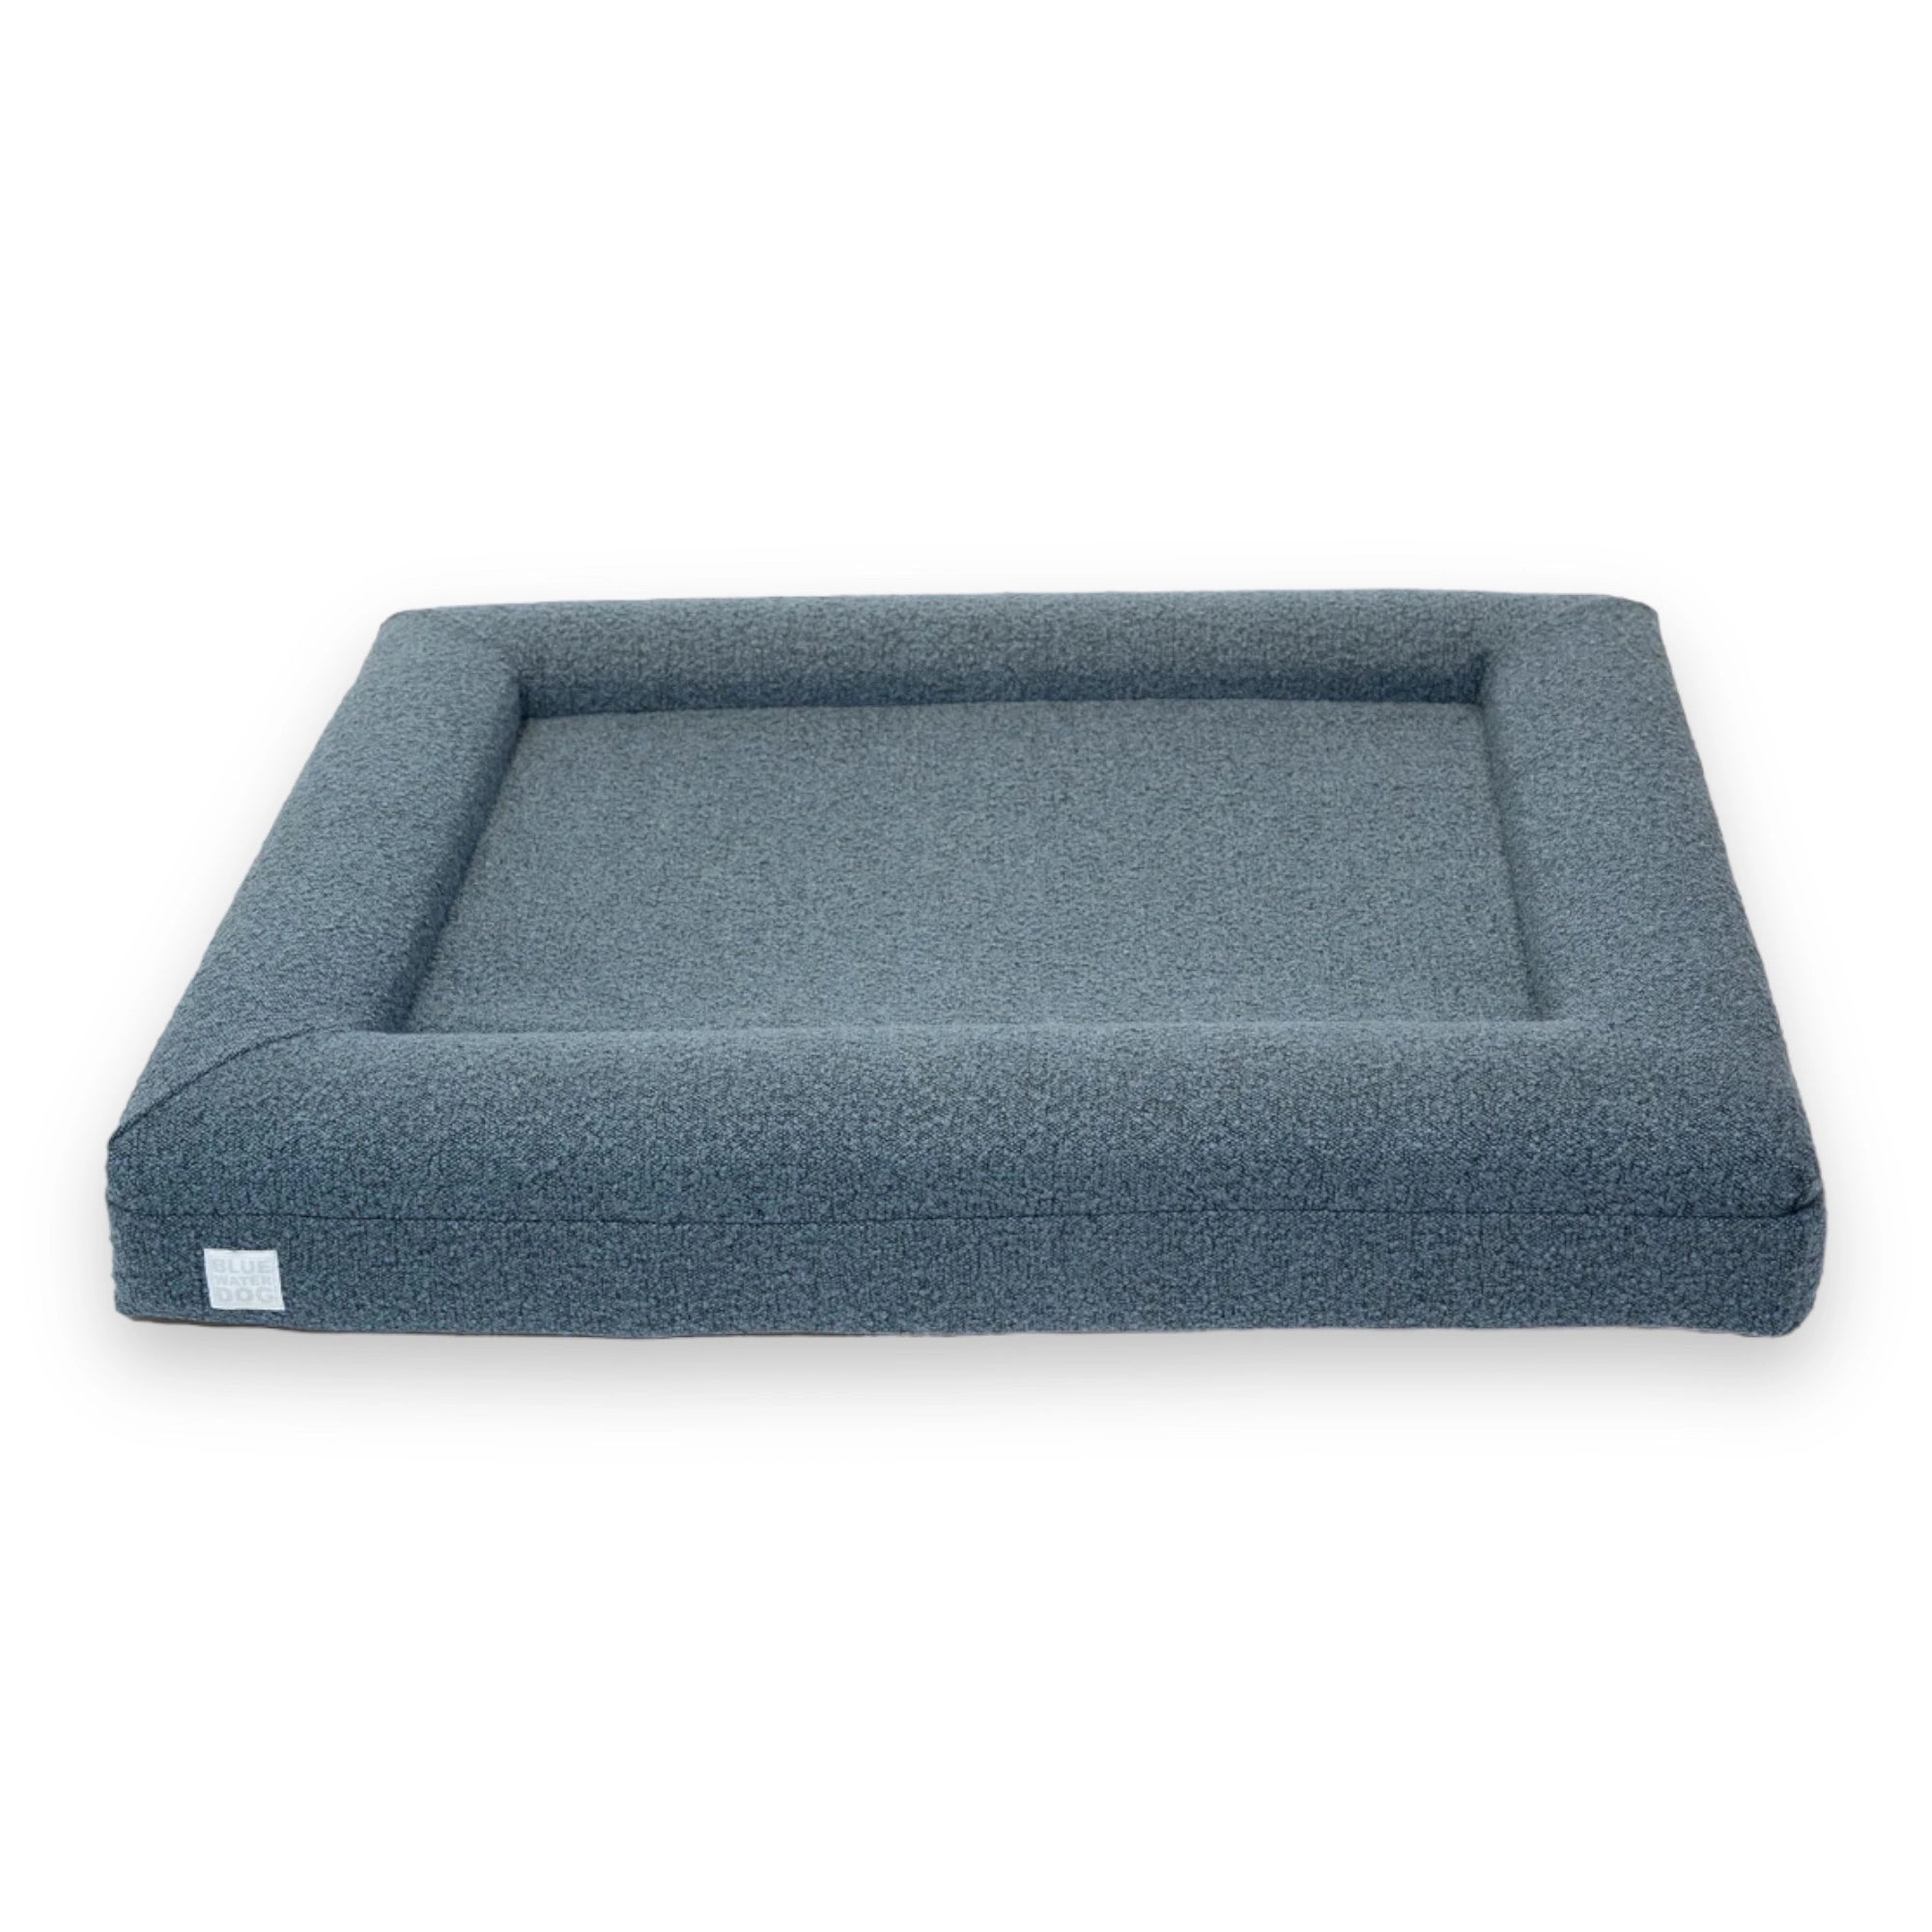 Front of a large, blue-colored orthopedic memory foam rectangular boucle dog bed with bolsters